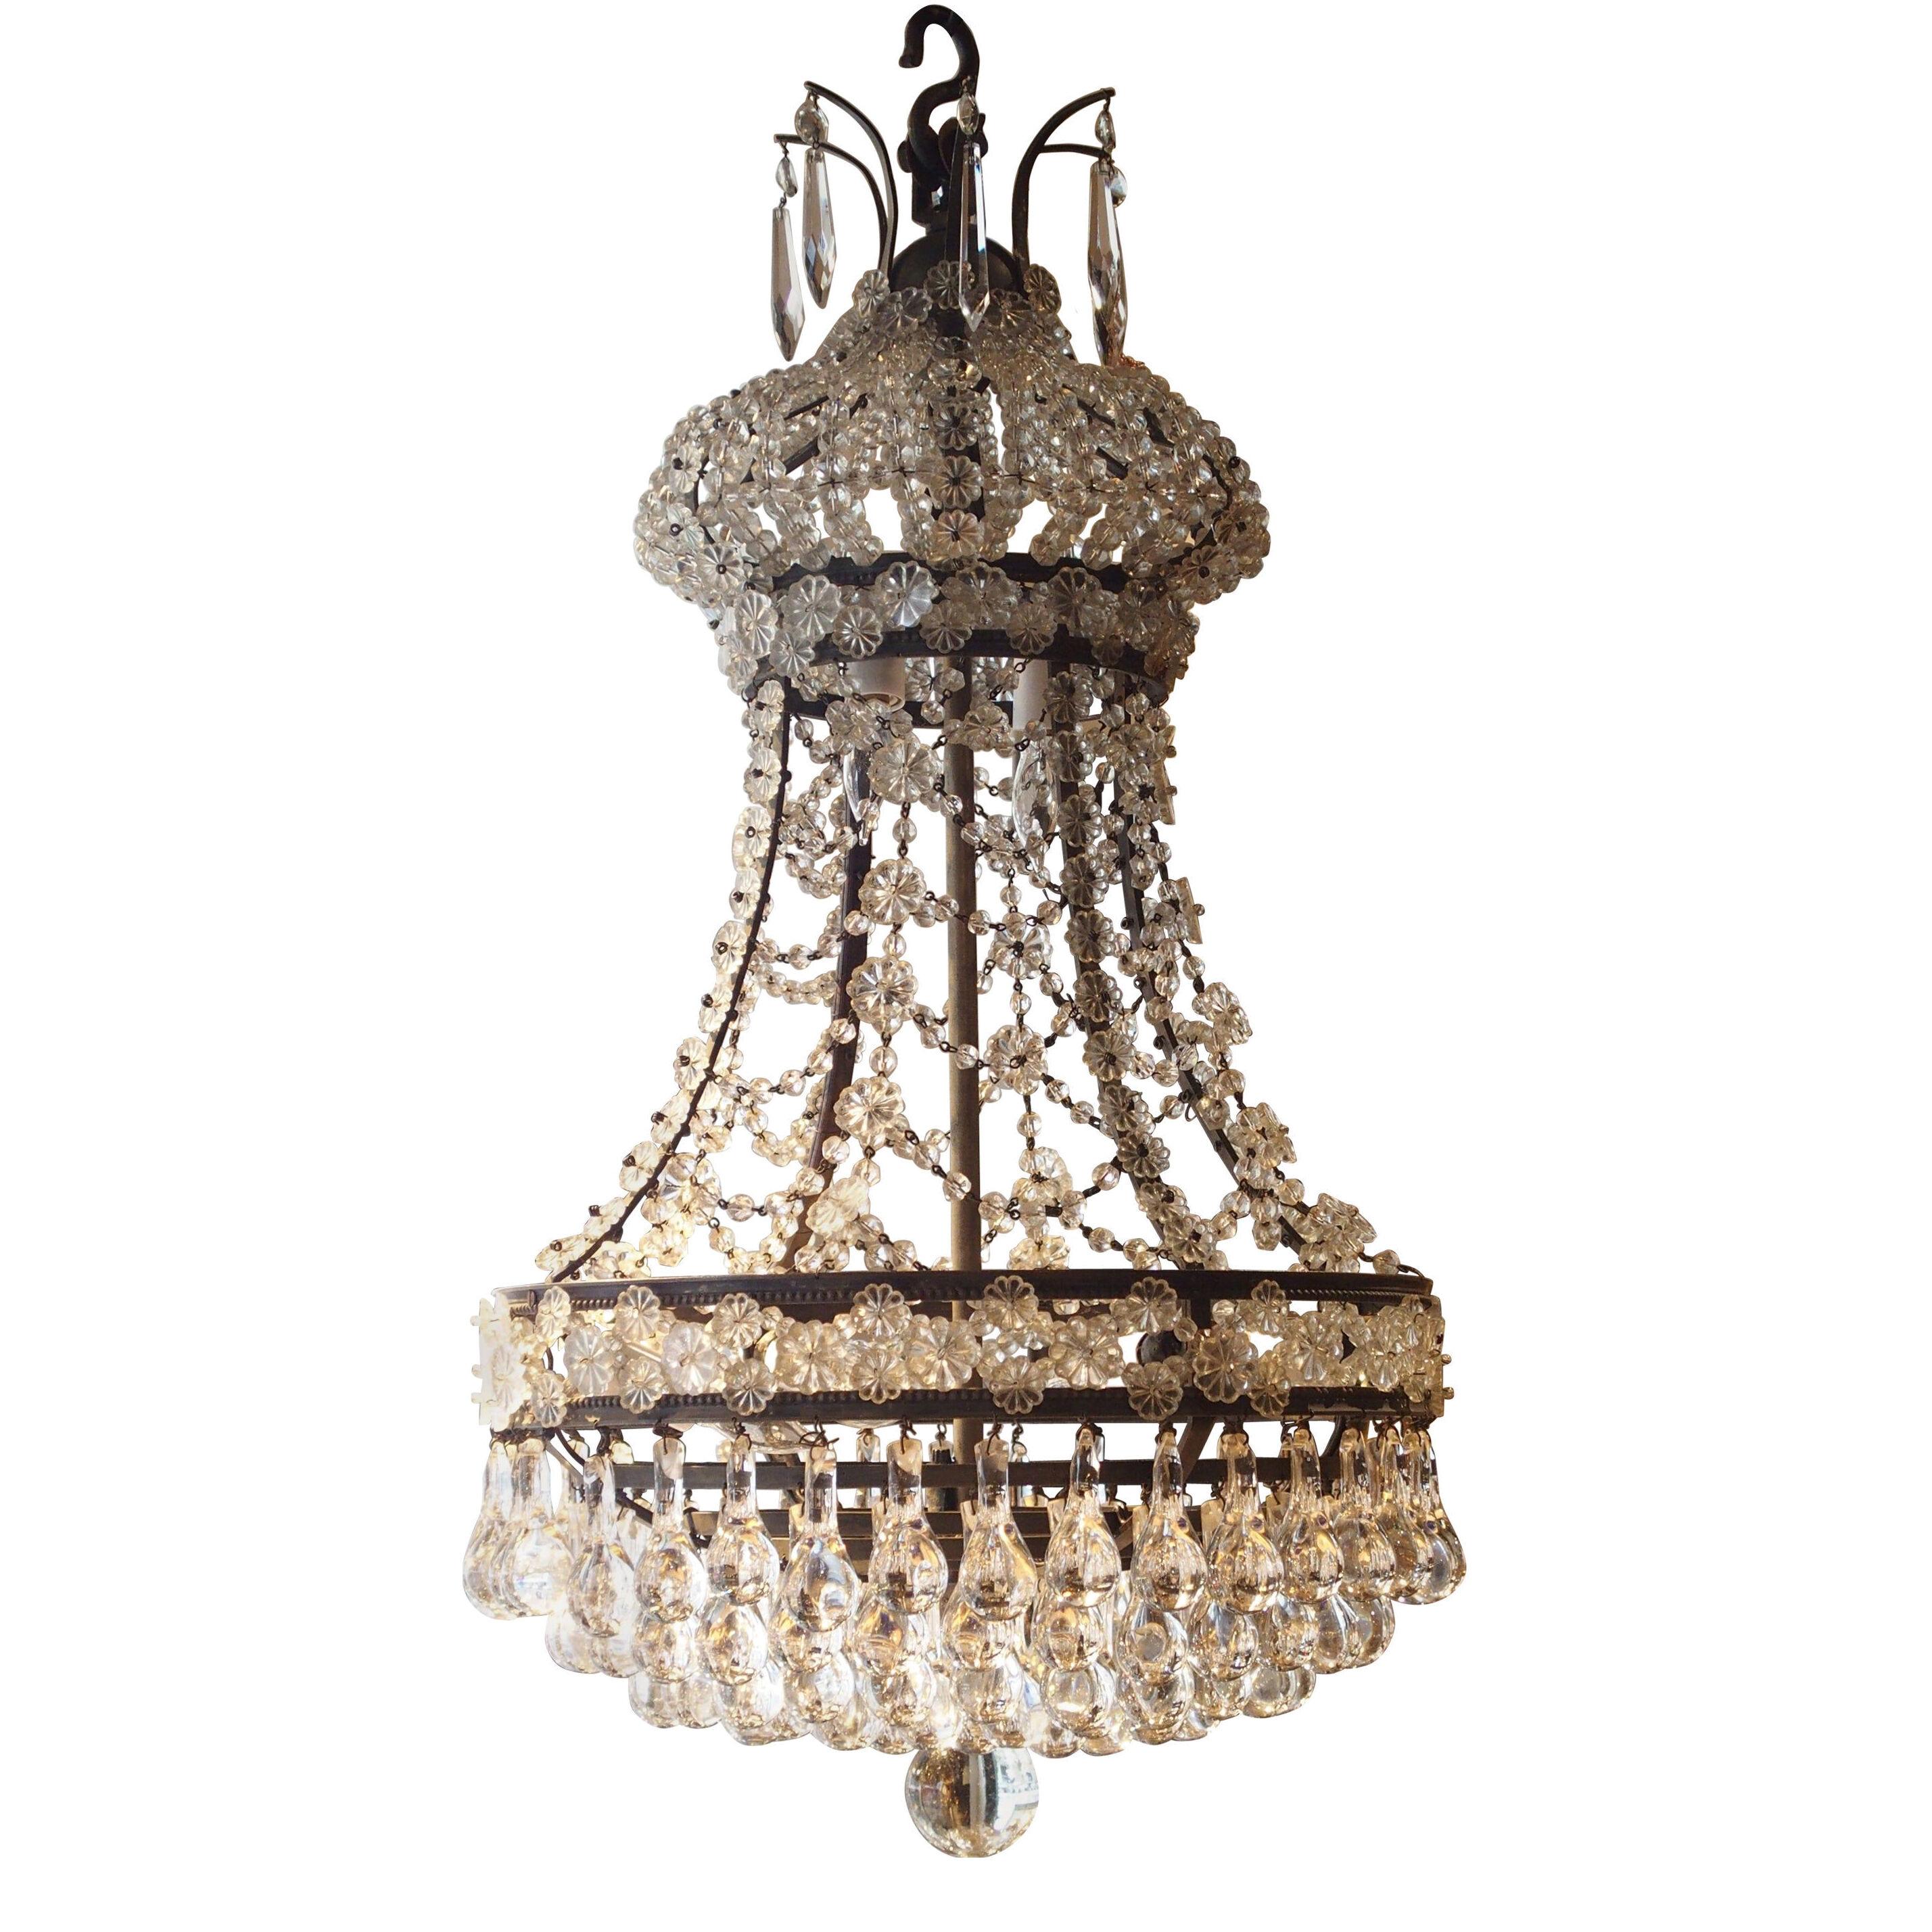 Small Antique French Louis XVI Style Crystal Chandelier, 19th Century